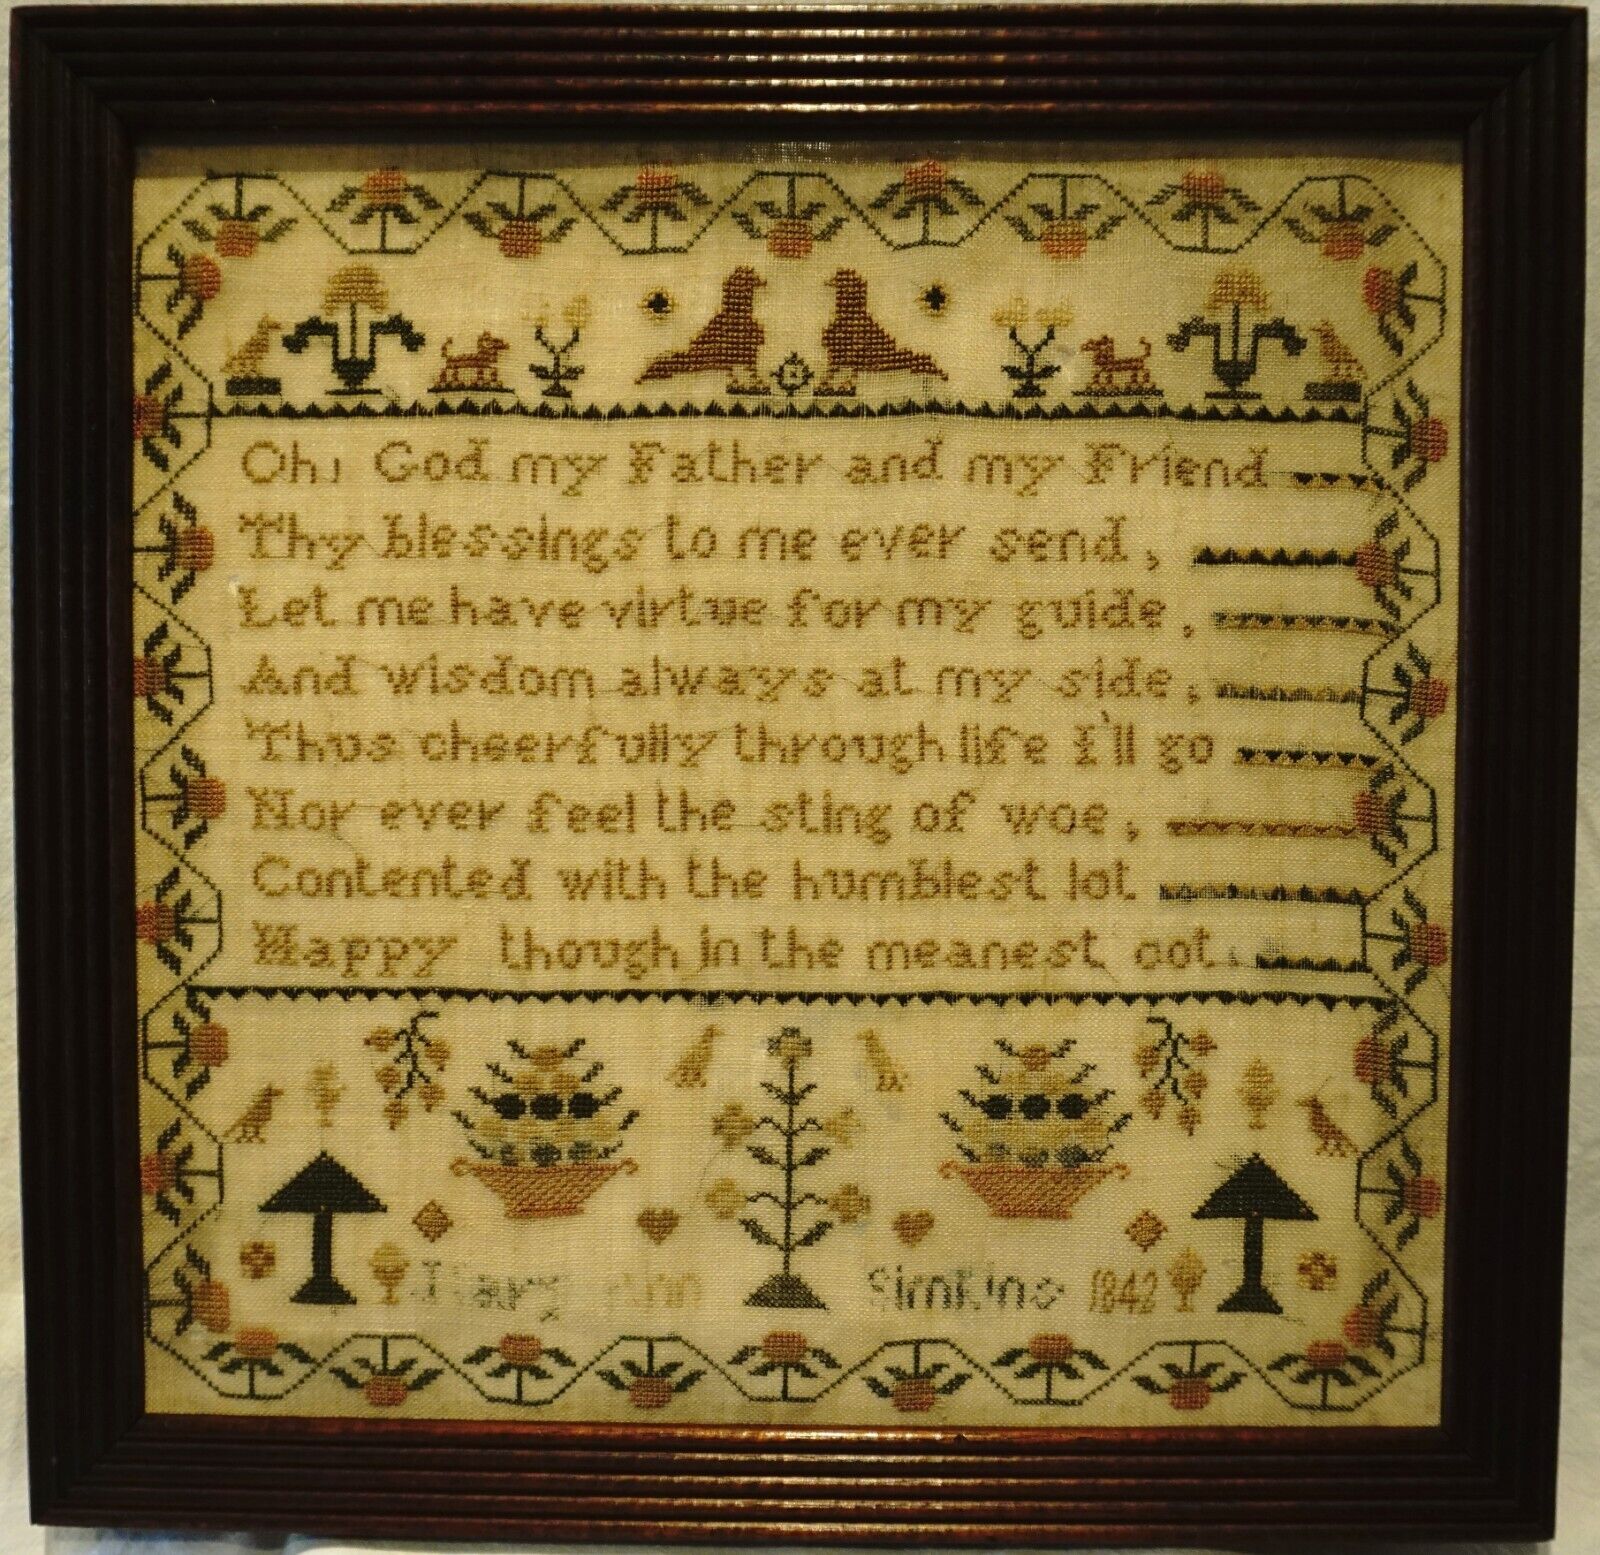 EARLY/MID 19TH CENTURY VERSE & MOTIF SAMPLER BY MARY ANN SIMKINS - 1842